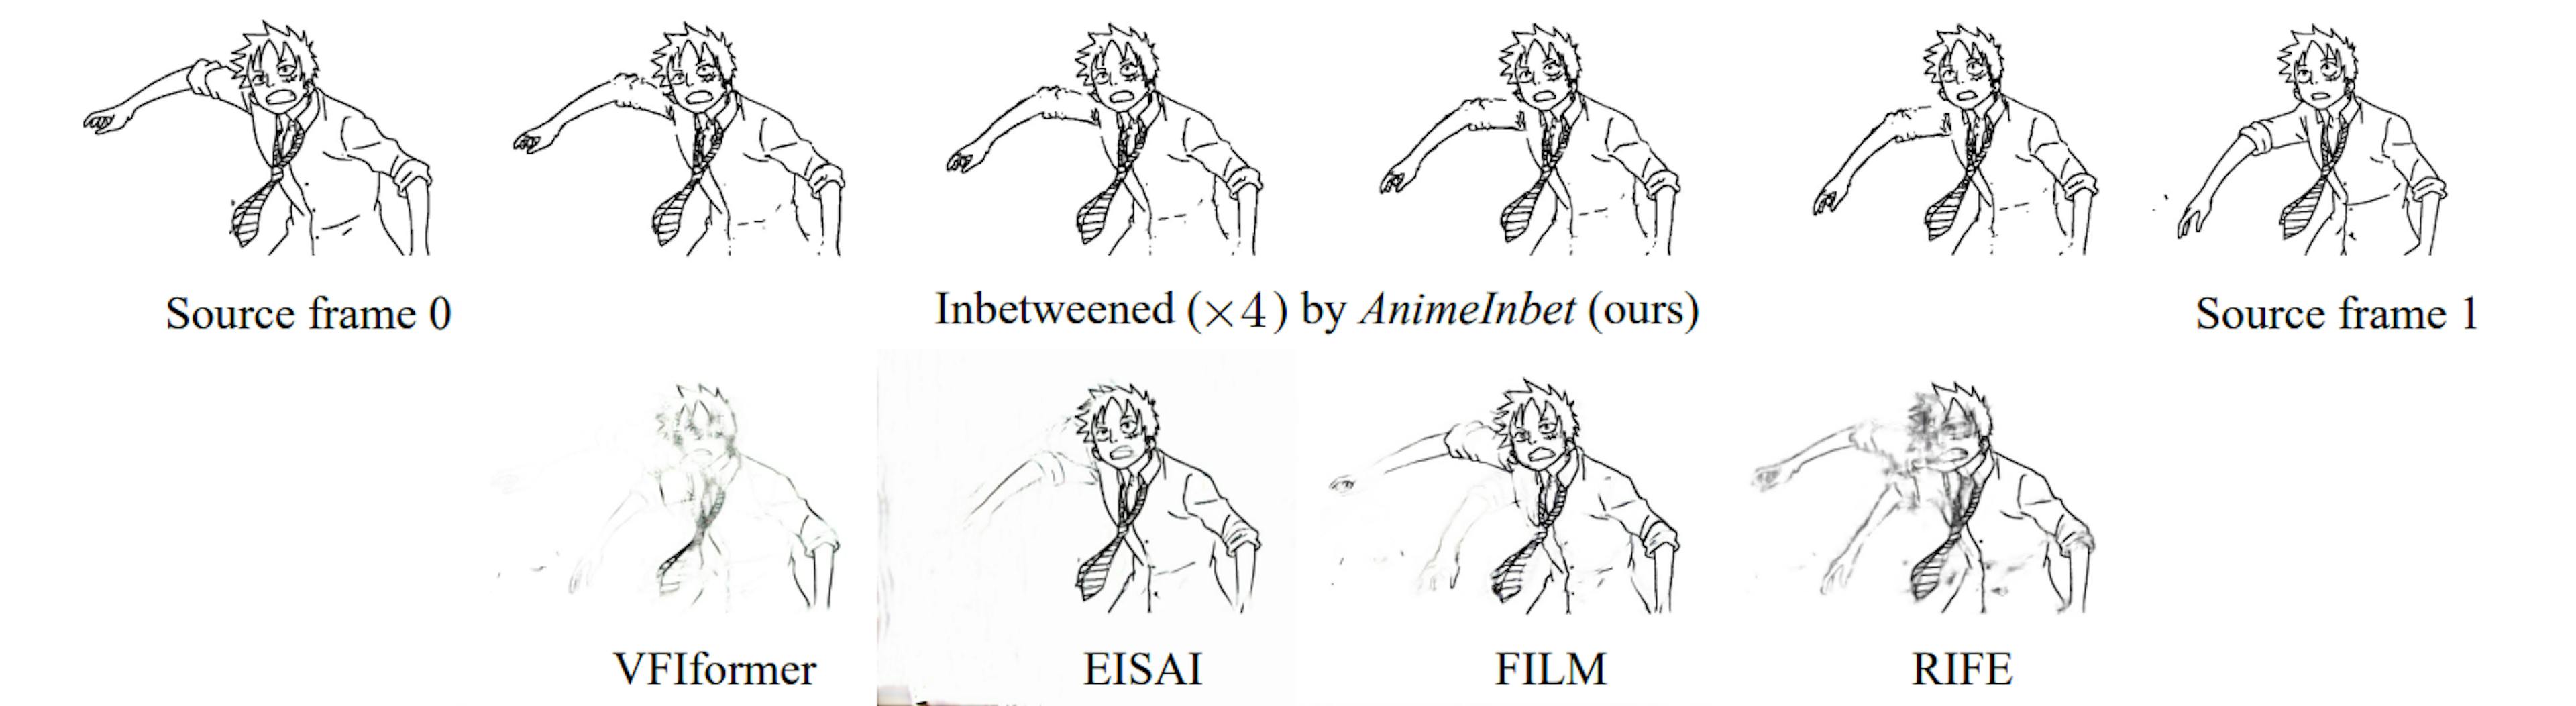 Figure 1: Inbetweening on two source cartoon line drawings of Monkey D. Luffy extracted from ONE PIECE. We compare ourproposed AnimeInbet with state-of-the-art frame interpolation methods VFIformer [14], EISAI [5], FILM [23] and RIFE [6].
